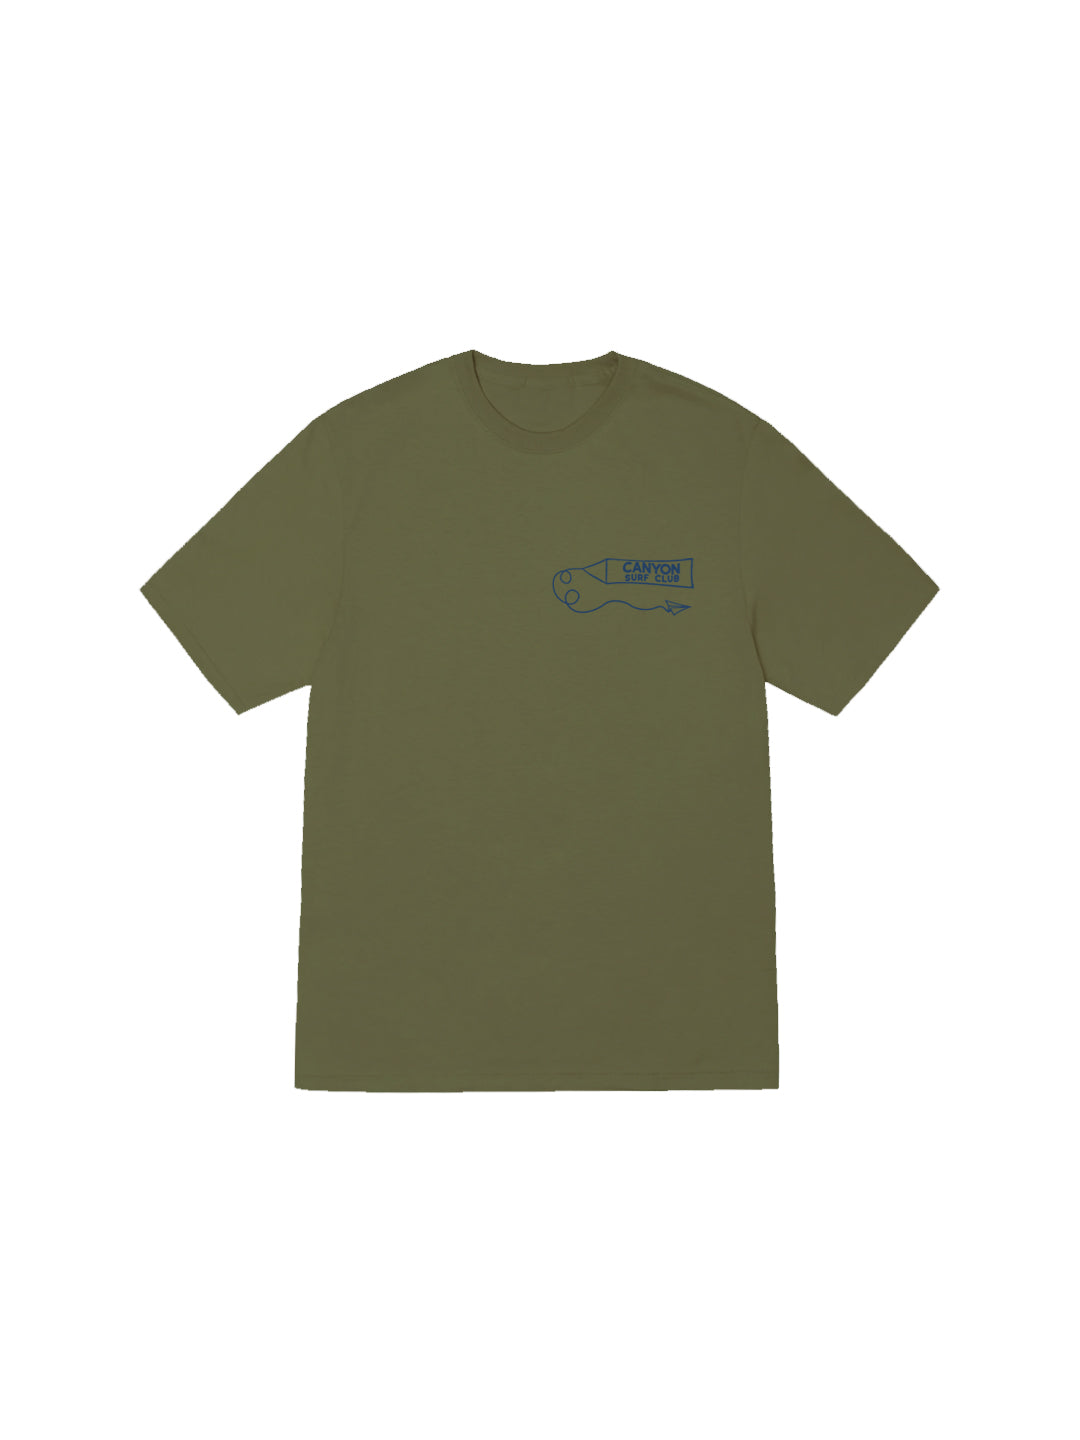 Canyon Surf Club Tee in Olive